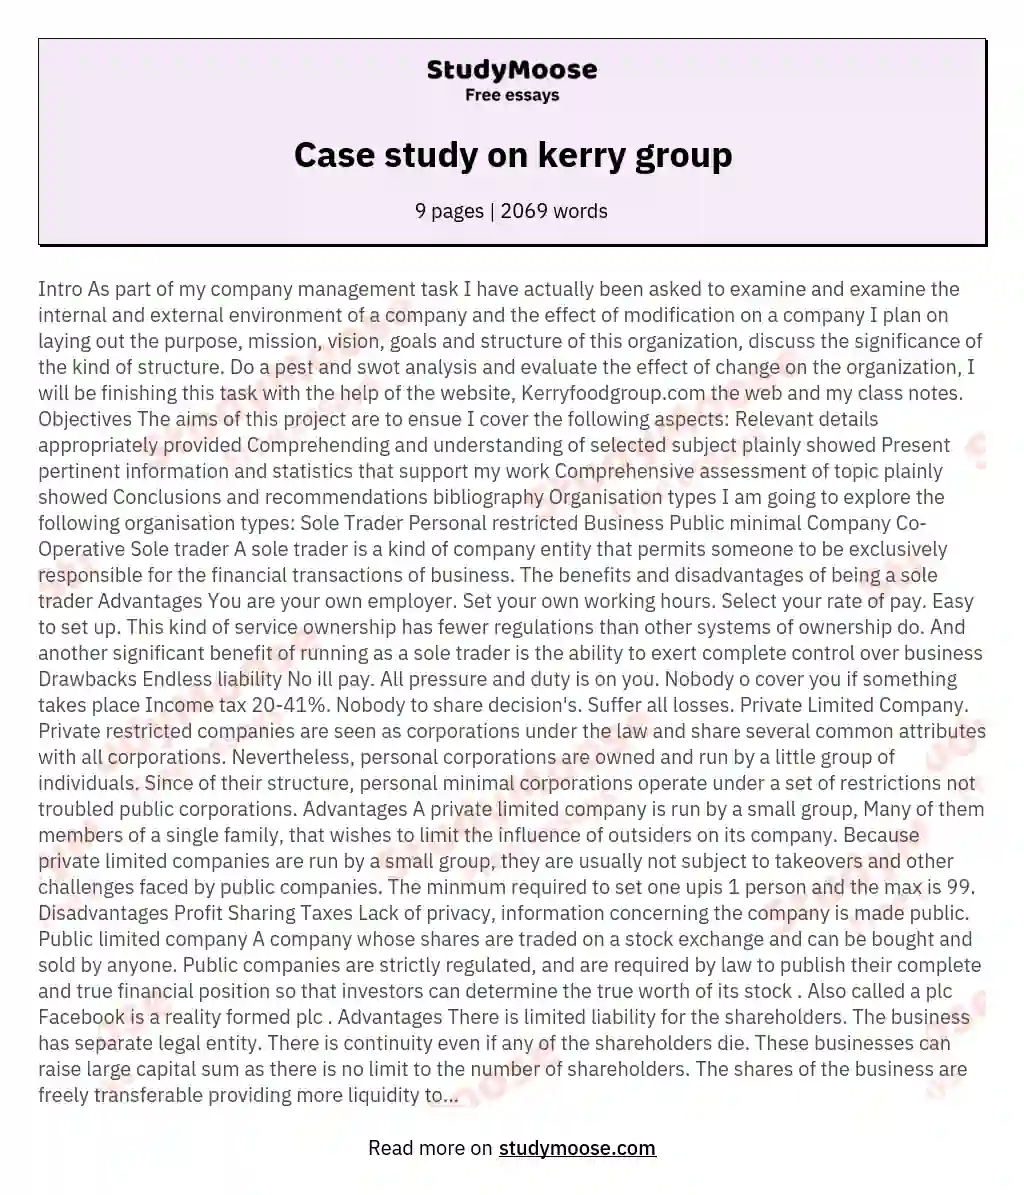 Case study on kerry group essay